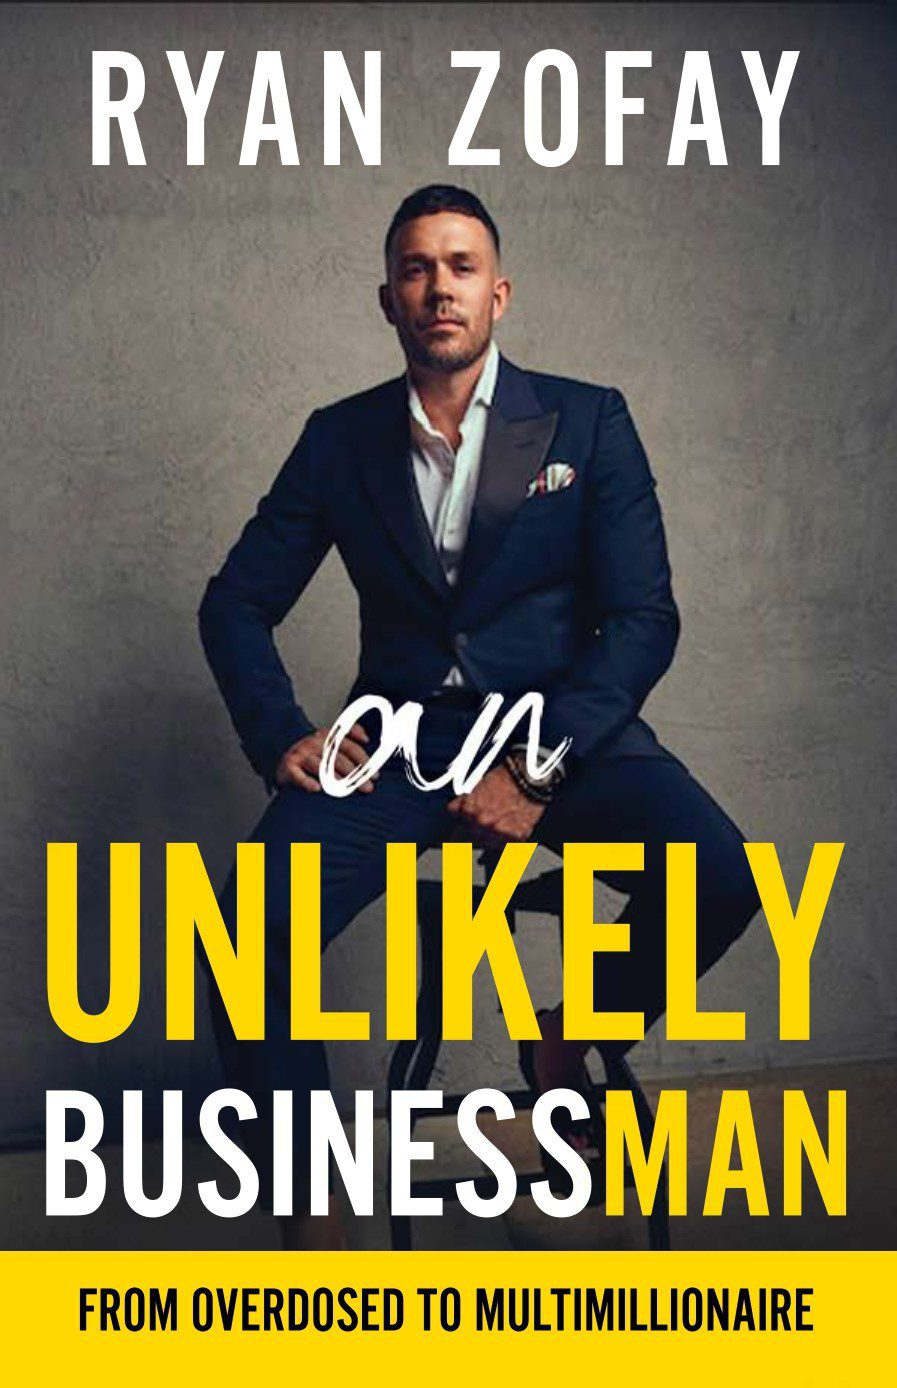 Ryan Zofay Author An Unlikely Businessman From overdosed to multimillionaire